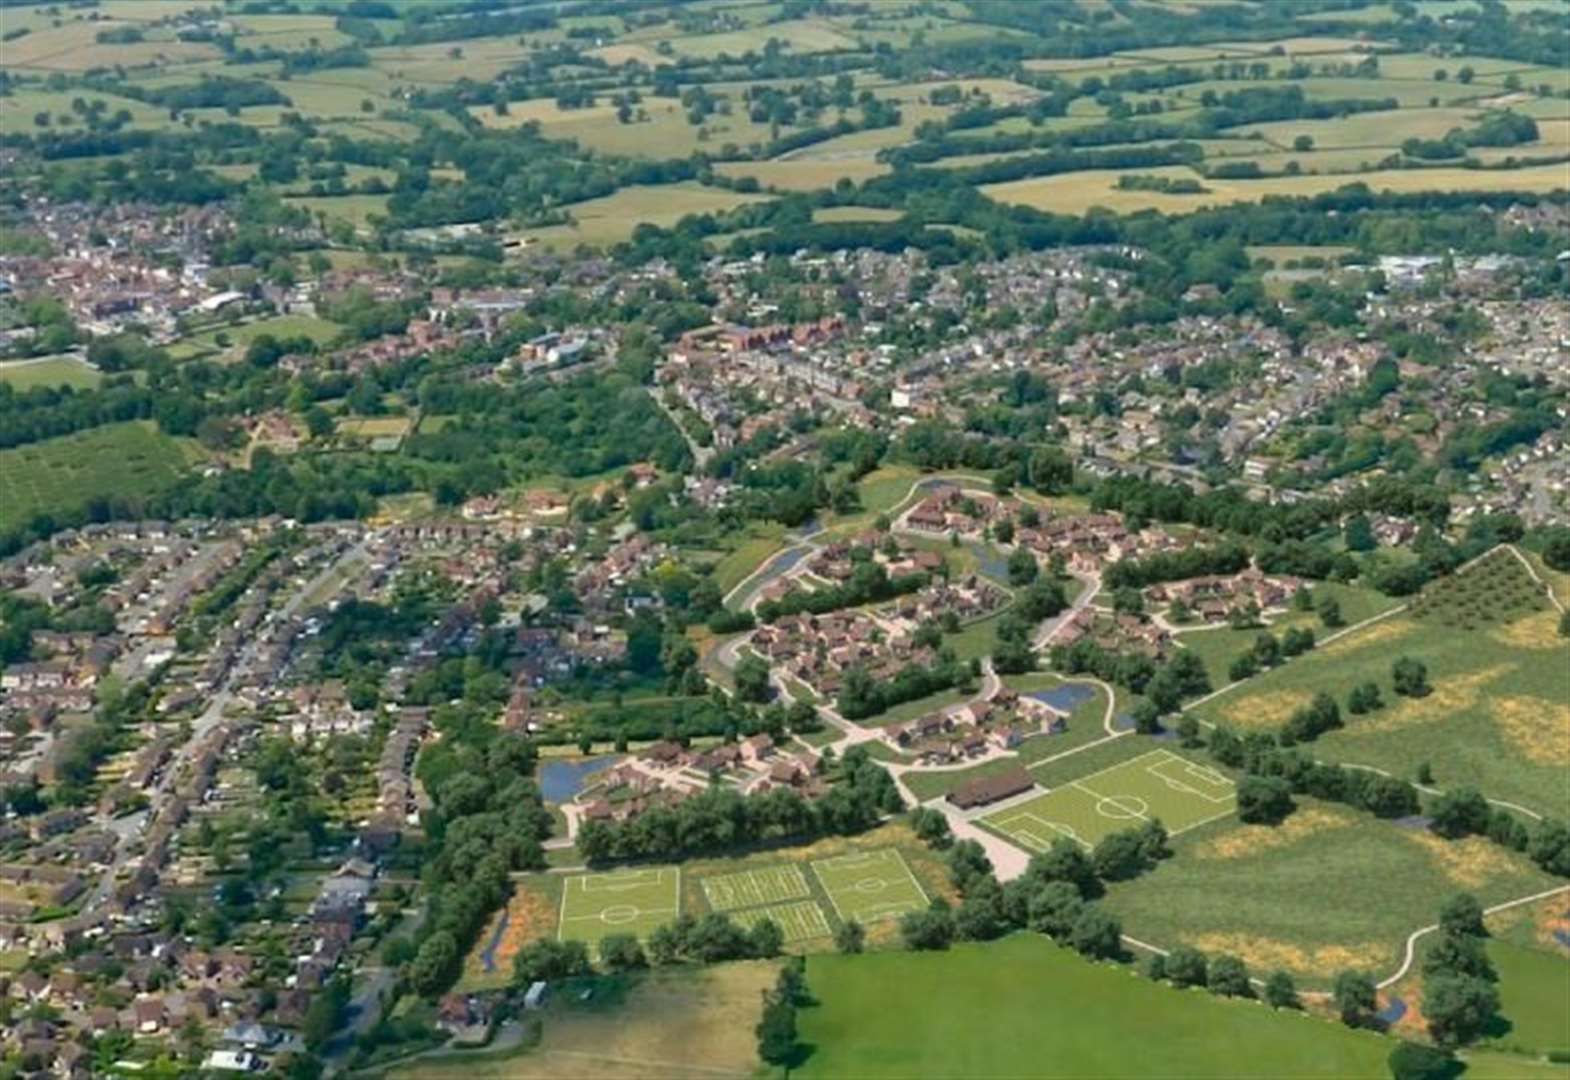 Controversial housing development to go ahead